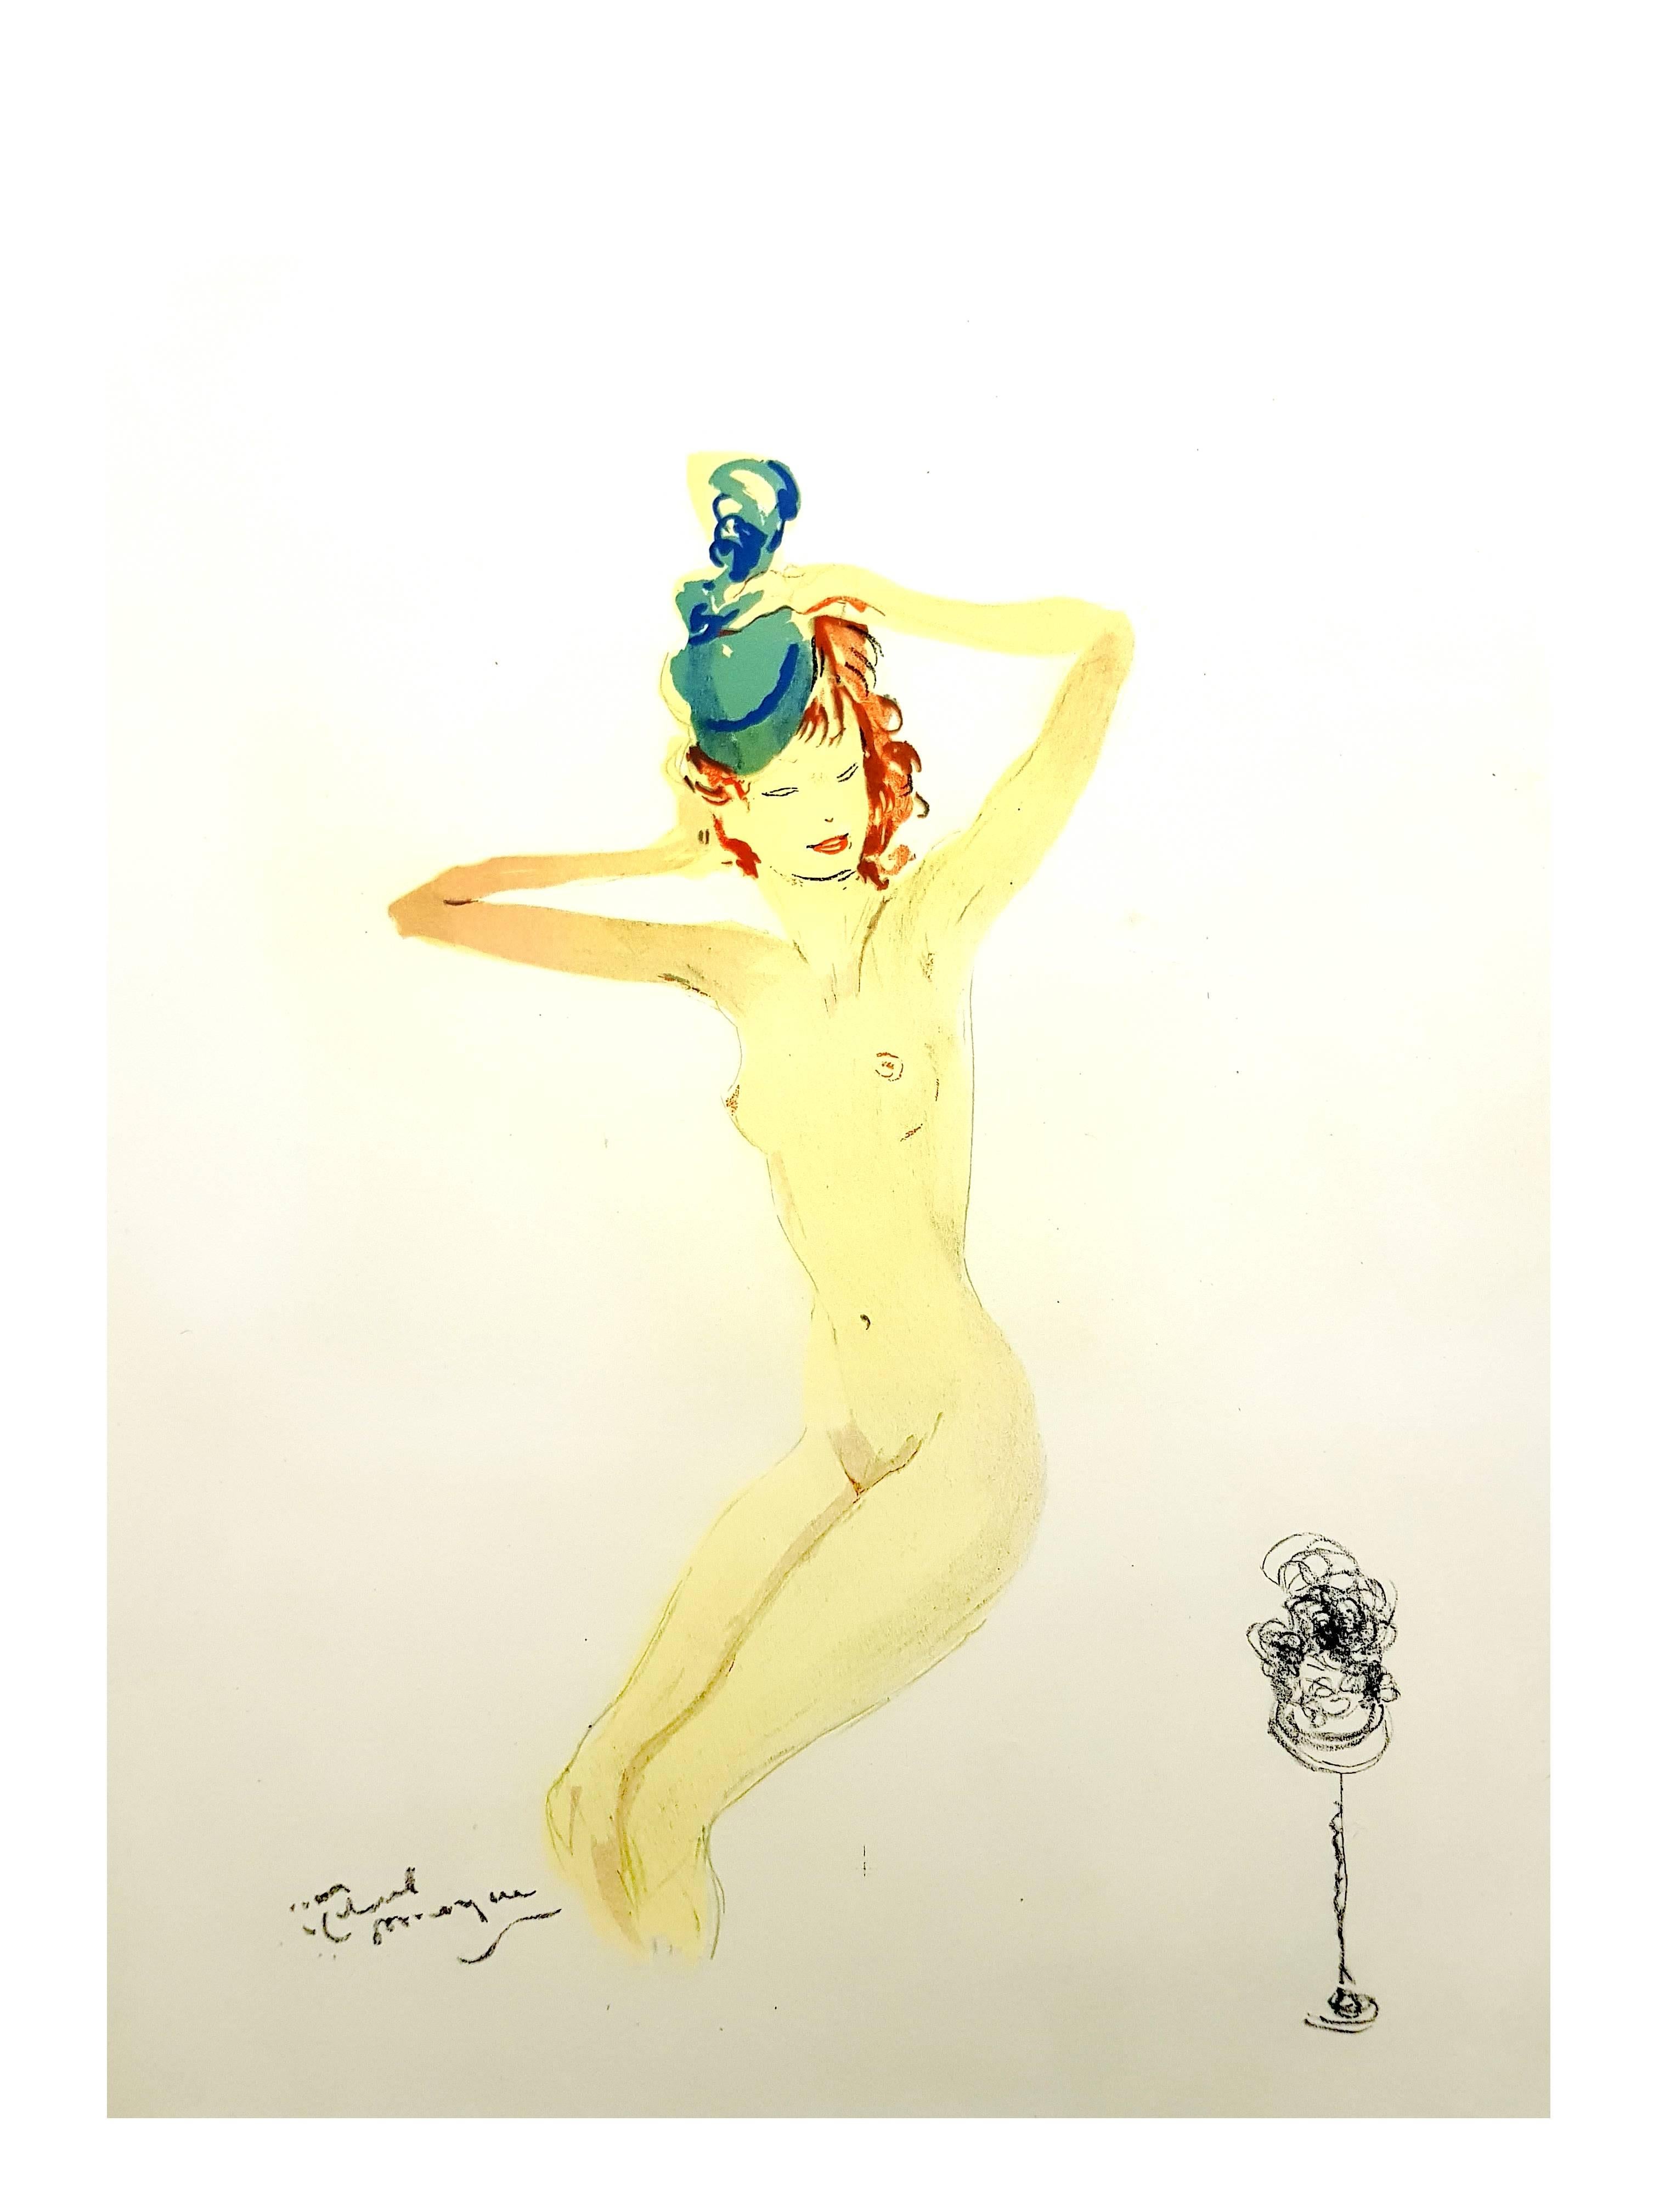 Original Lithograph by Jean-Gabriel Domergue
Title: Almost Dressed
Signed in the plate
Dimensions: 40 x 31 cm
1956
Edition of 197
This artwork is part of the famous portfolio 